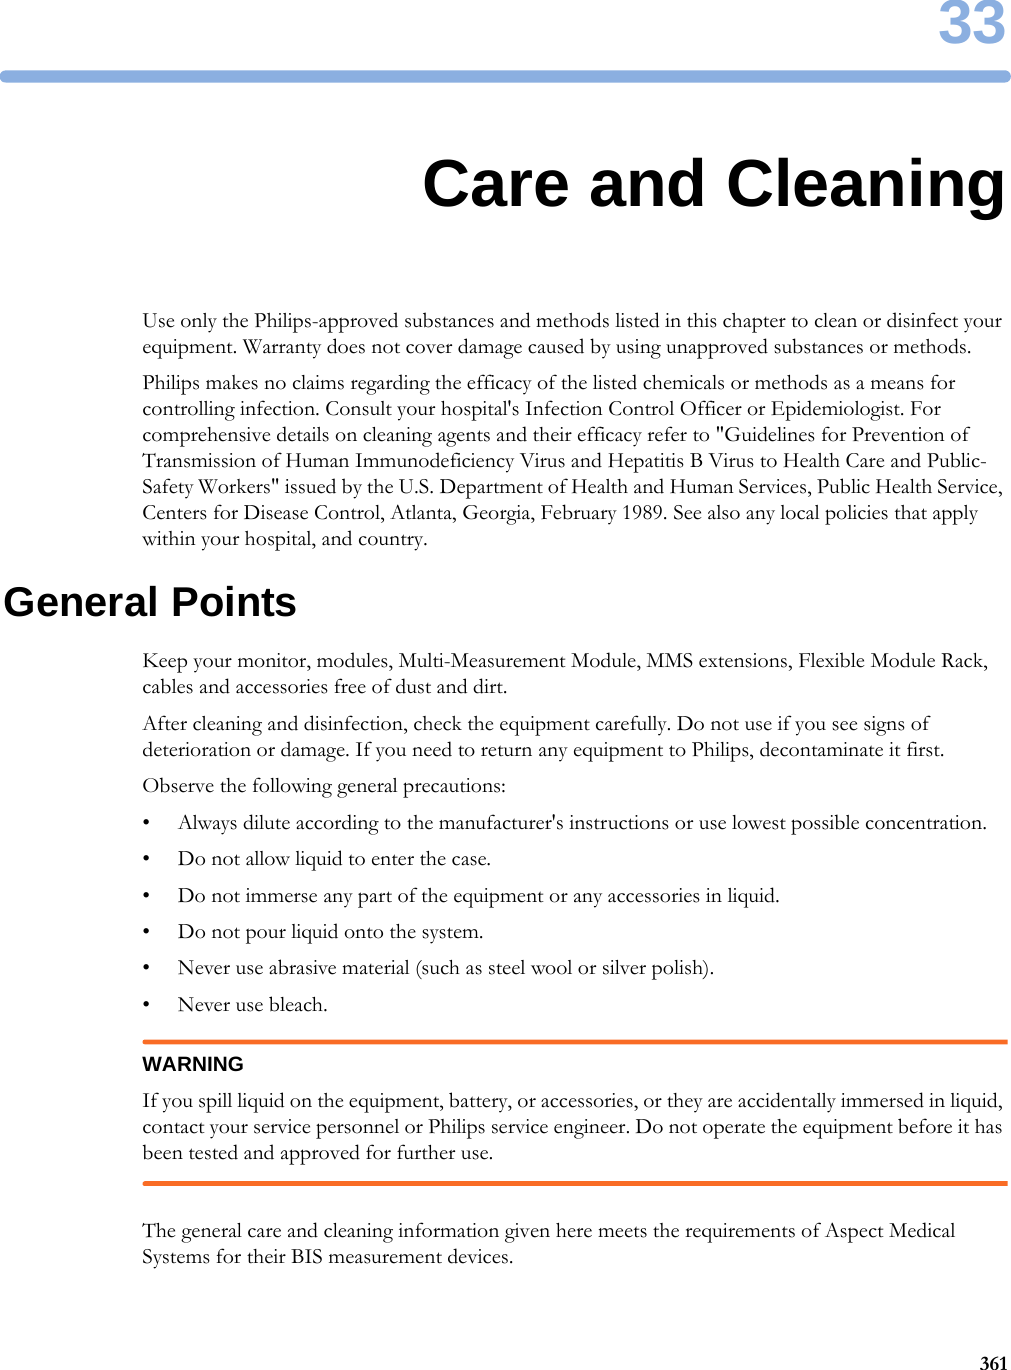 3336133Care and CleaningUse only the Philips-approved substances and methods listed in this chapter to clean or disinfect your equipment. Warranty does not cover damage caused by using unapproved substances or methods.Philips makes no claims regarding the efficacy of the listed chemicals or methods as a means for controlling infection. Consult your hospital&apos;s Infection Control Officer or Epidemiologist. For comprehensive details on cleaning agents and their efficacy refer to &quot;Guidelines for Prevention of Transmission of Human Immunodeficiency Virus and Hepatitis B Virus to Health Care and Public-Safety Workers&quot; issued by the U.S. Department of Health and Human Services, Public Health Service, Centers for Disease Control, Atlanta, Georgia, February 1989. See also any local policies that apply within your hospital, and country.General PointsKeep your monitor, modules, Multi-Measurement Module, MMS extensions, Flexible Module Rack, cables and accessories free of dust and dirt. After cleaning and disinfection, check the equipment carefully. Do not use if you see signs of deterioration or damage. If you need to return any equipment to Philips, decontaminate it first.Observe the following general precautions:• Always dilute according to the manufacturer&apos;s instructions or use lowest possible concentration.• Do not allow liquid to enter the case.• Do not immerse any part of the equipment or any accessories in liquid.• Do not pour liquid onto the system.• Never use abrasive material (such as steel wool or silver polish).• Never use bleach.WARNINGIf you spill liquid on the equipment, battery, or accessories, or they are accidentally immersed in liquid, contact your service personnel or Philips service engineer. Do not operate the equipment before it has been tested and approved for further use.The general care and cleaning information given here meets the requirements of Aspect Medical Systems for their BIS measurement devices.